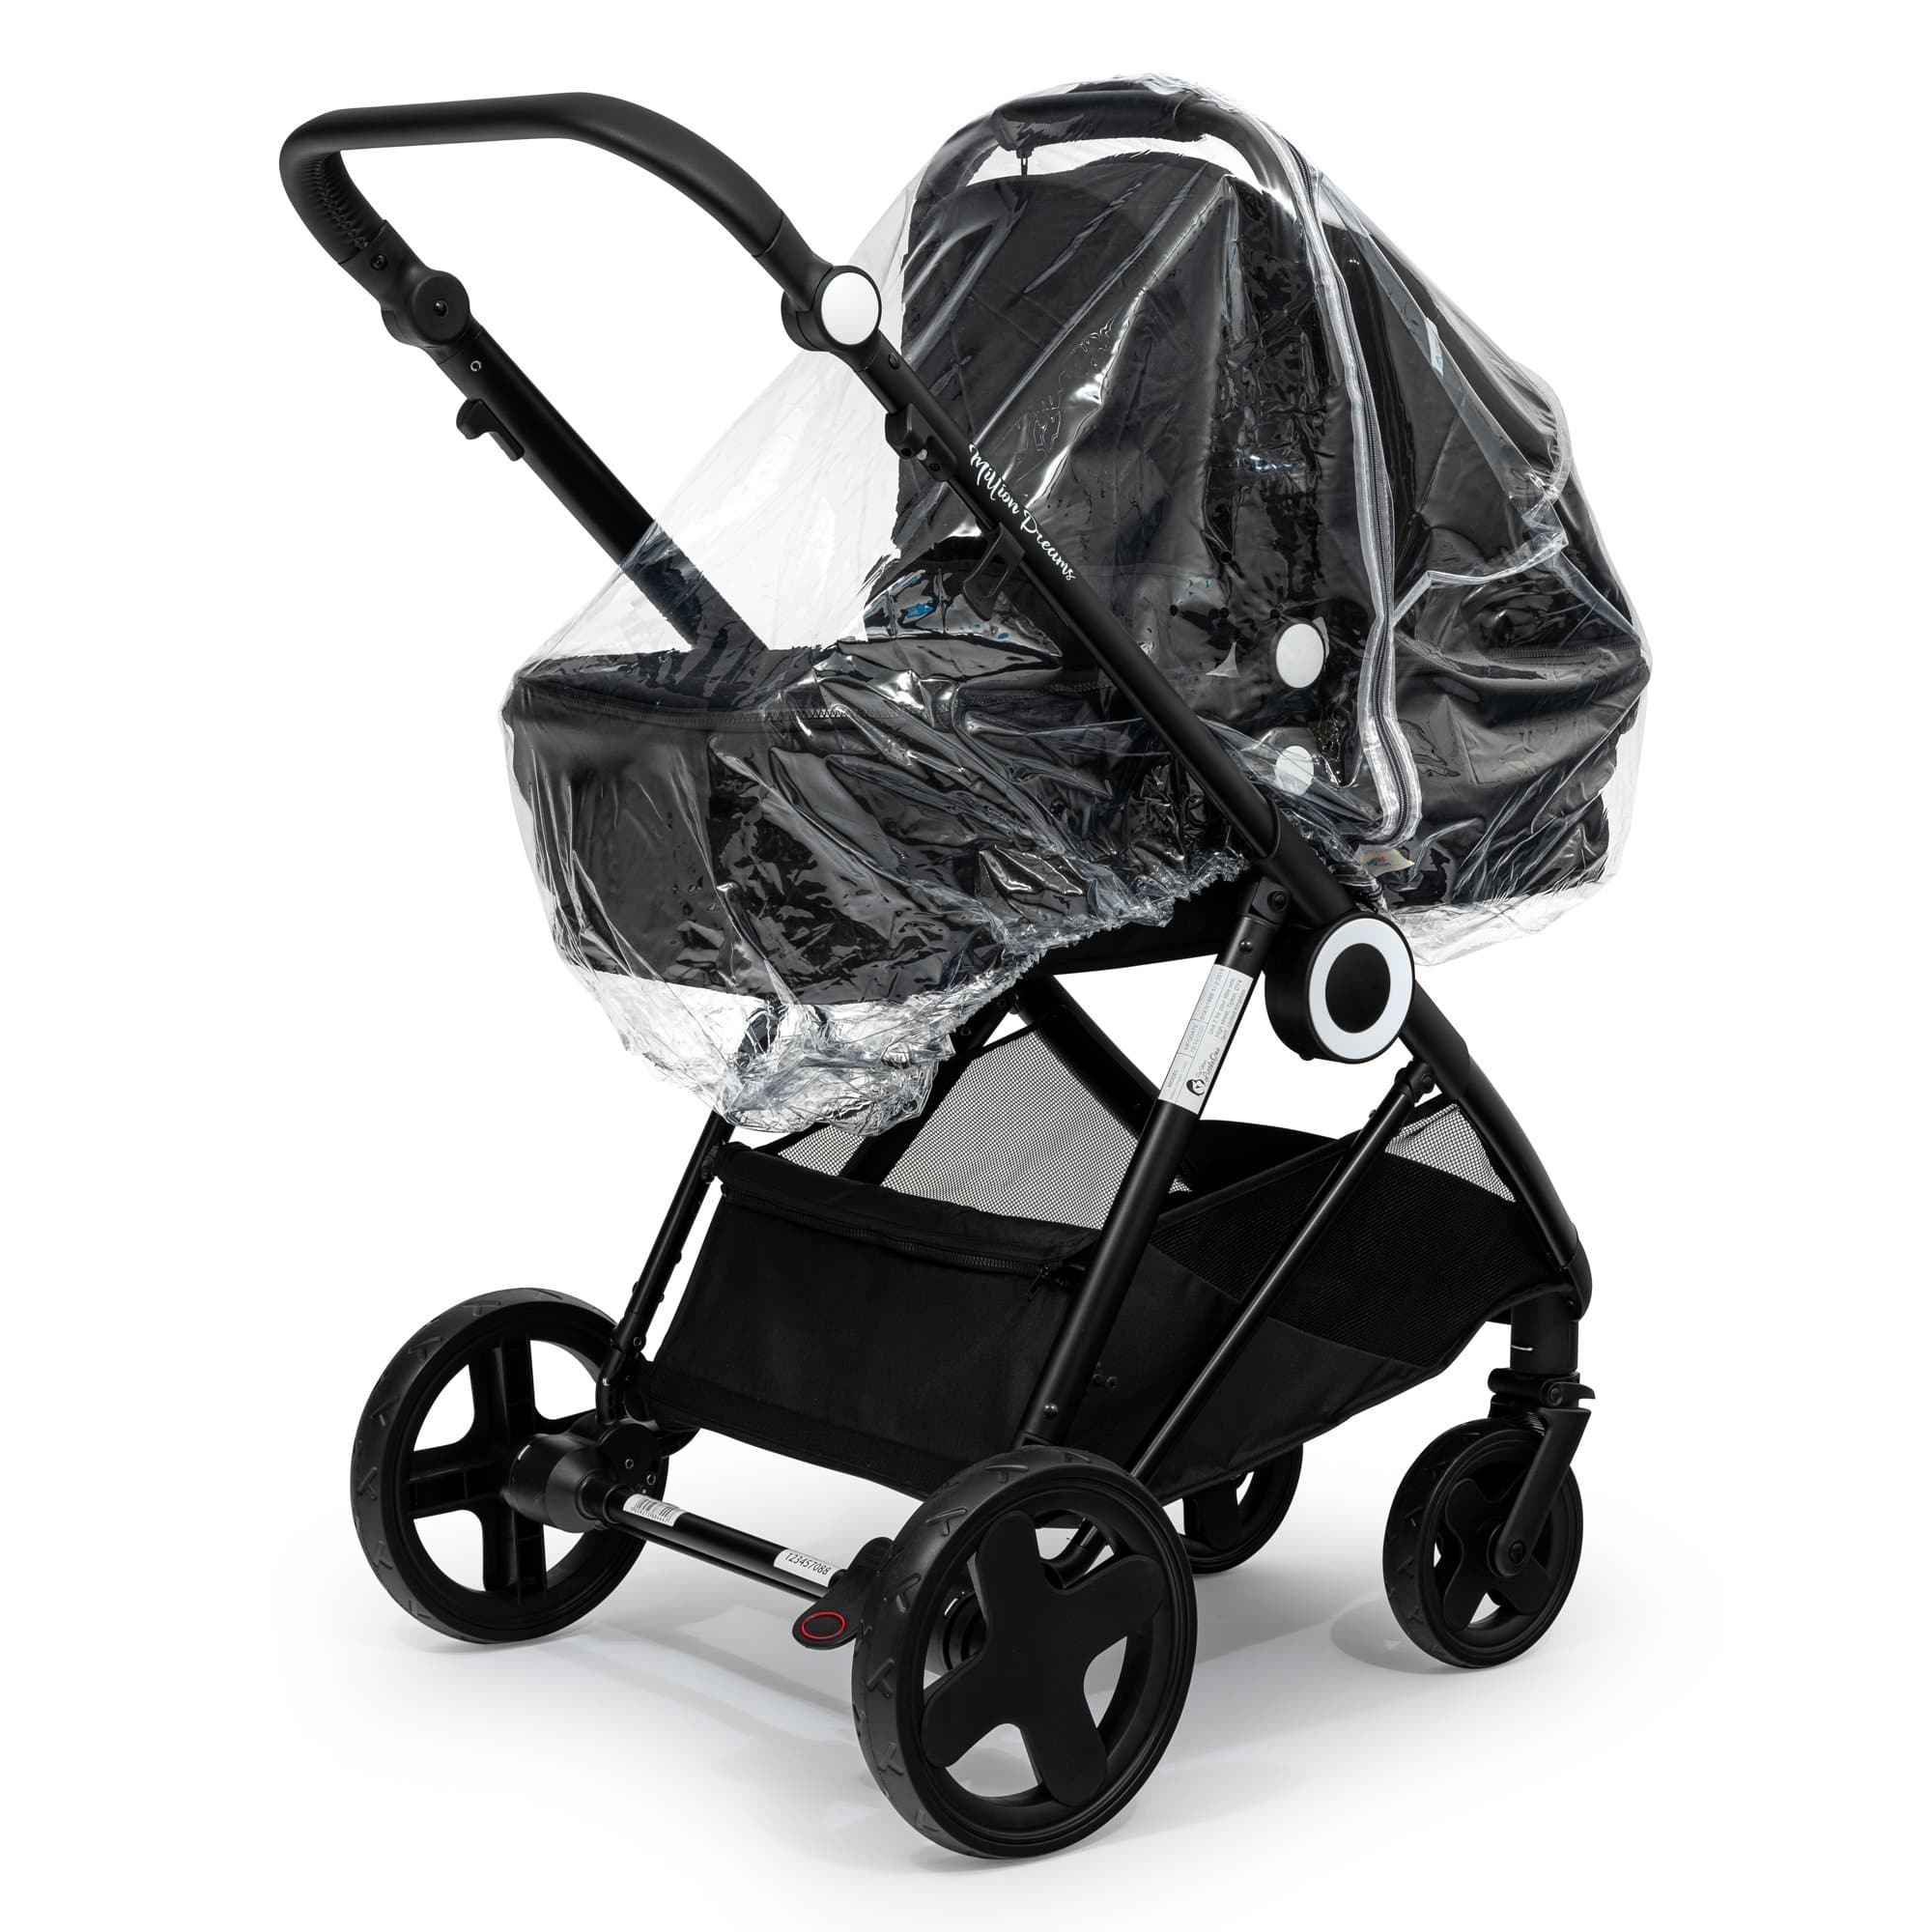 2 in 1 Rain Cover Compatible with iCandy - Fits All Models - For Your Little One